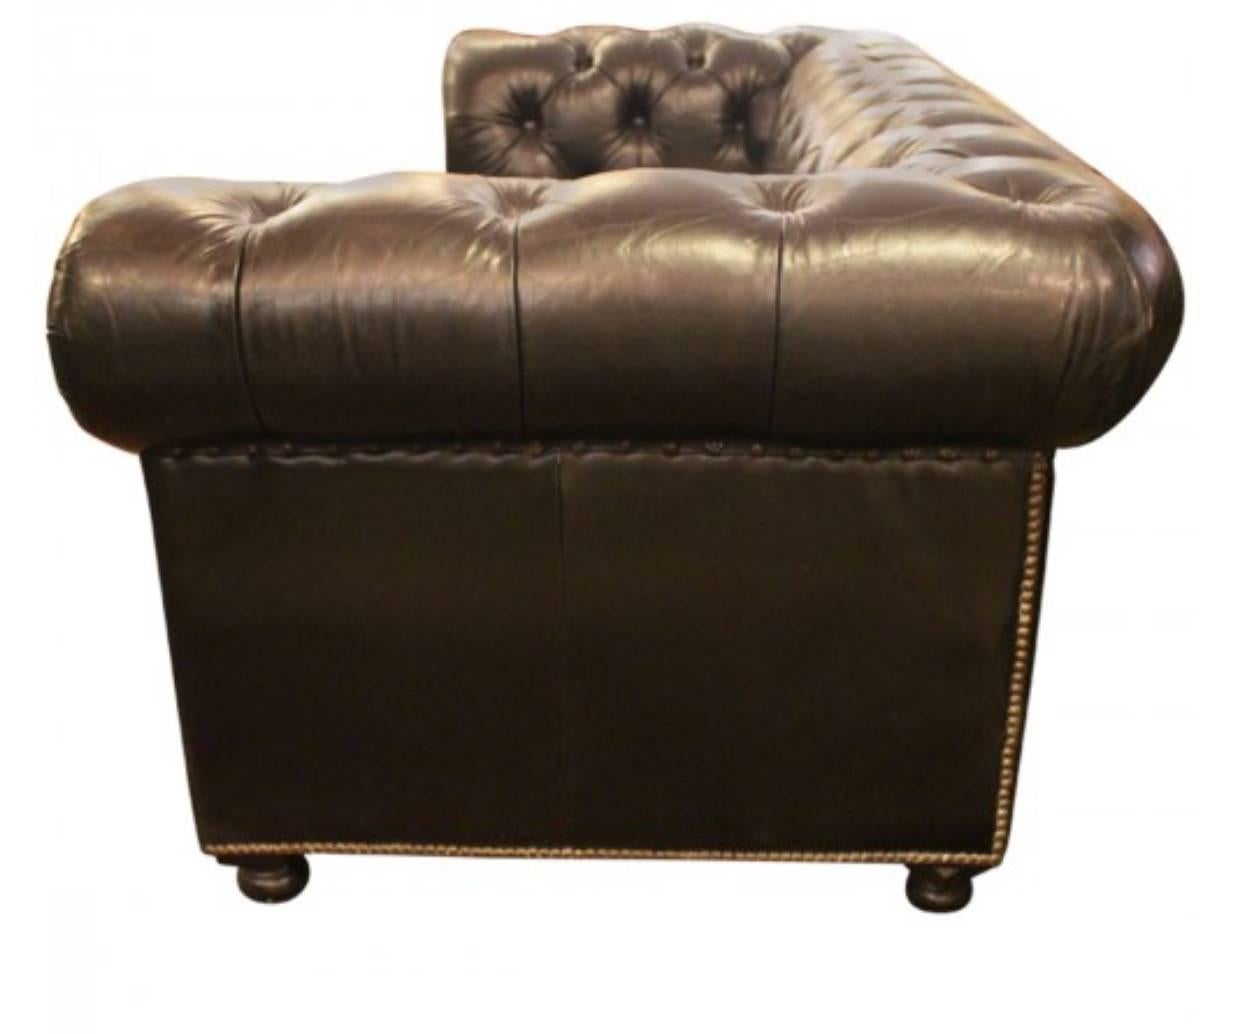 Large Ralph Lauren Black Leather Tufted Cigar Couch 2